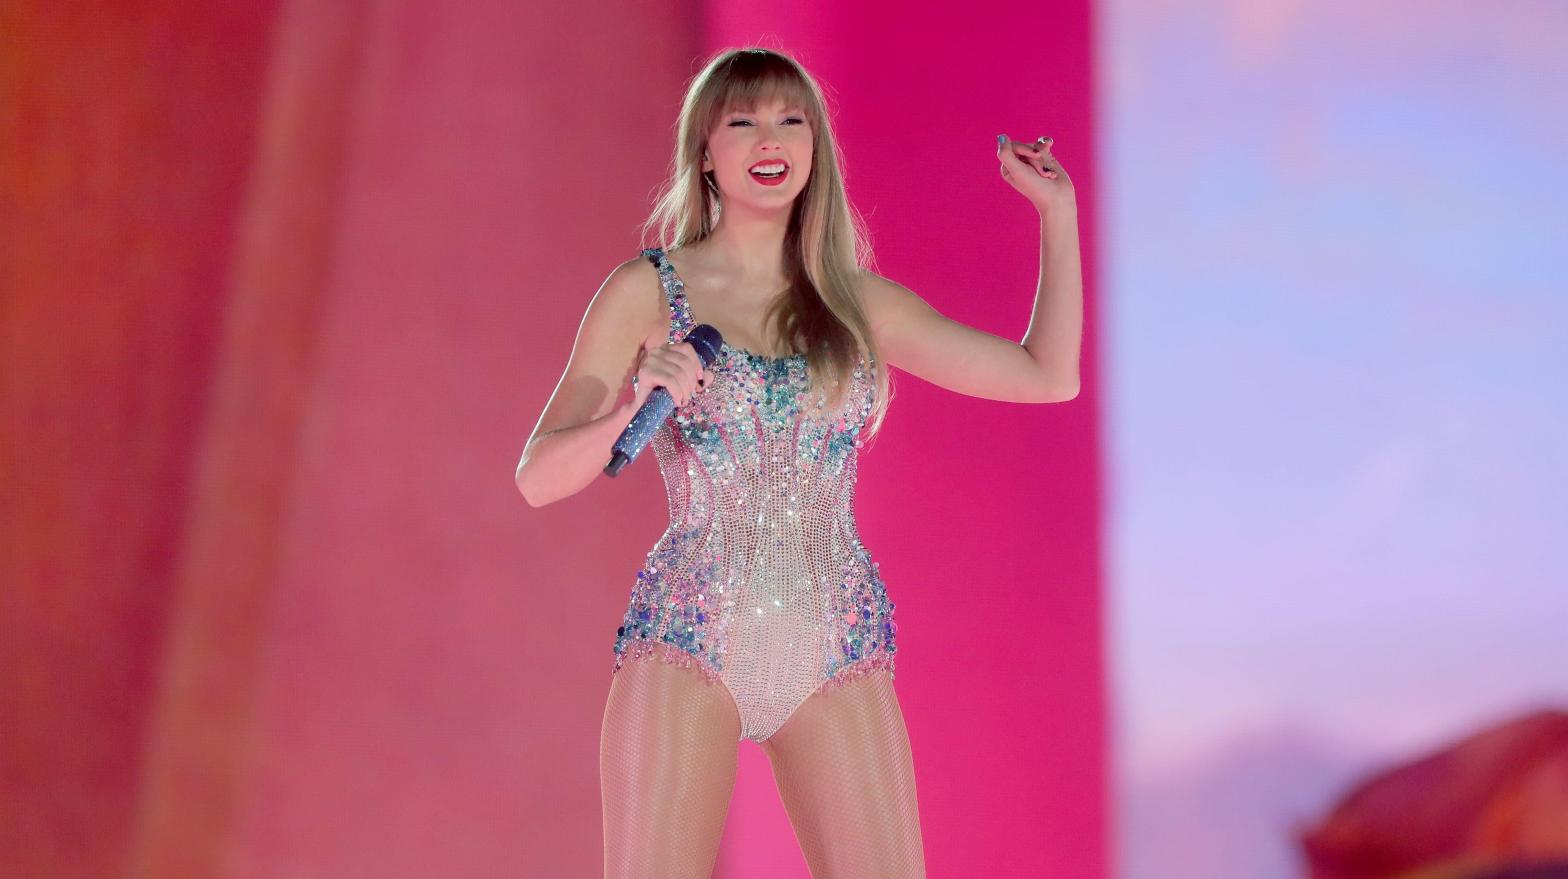 I guess you could say Swift knew they were trouble... (Image: John Medina, Getty Images)